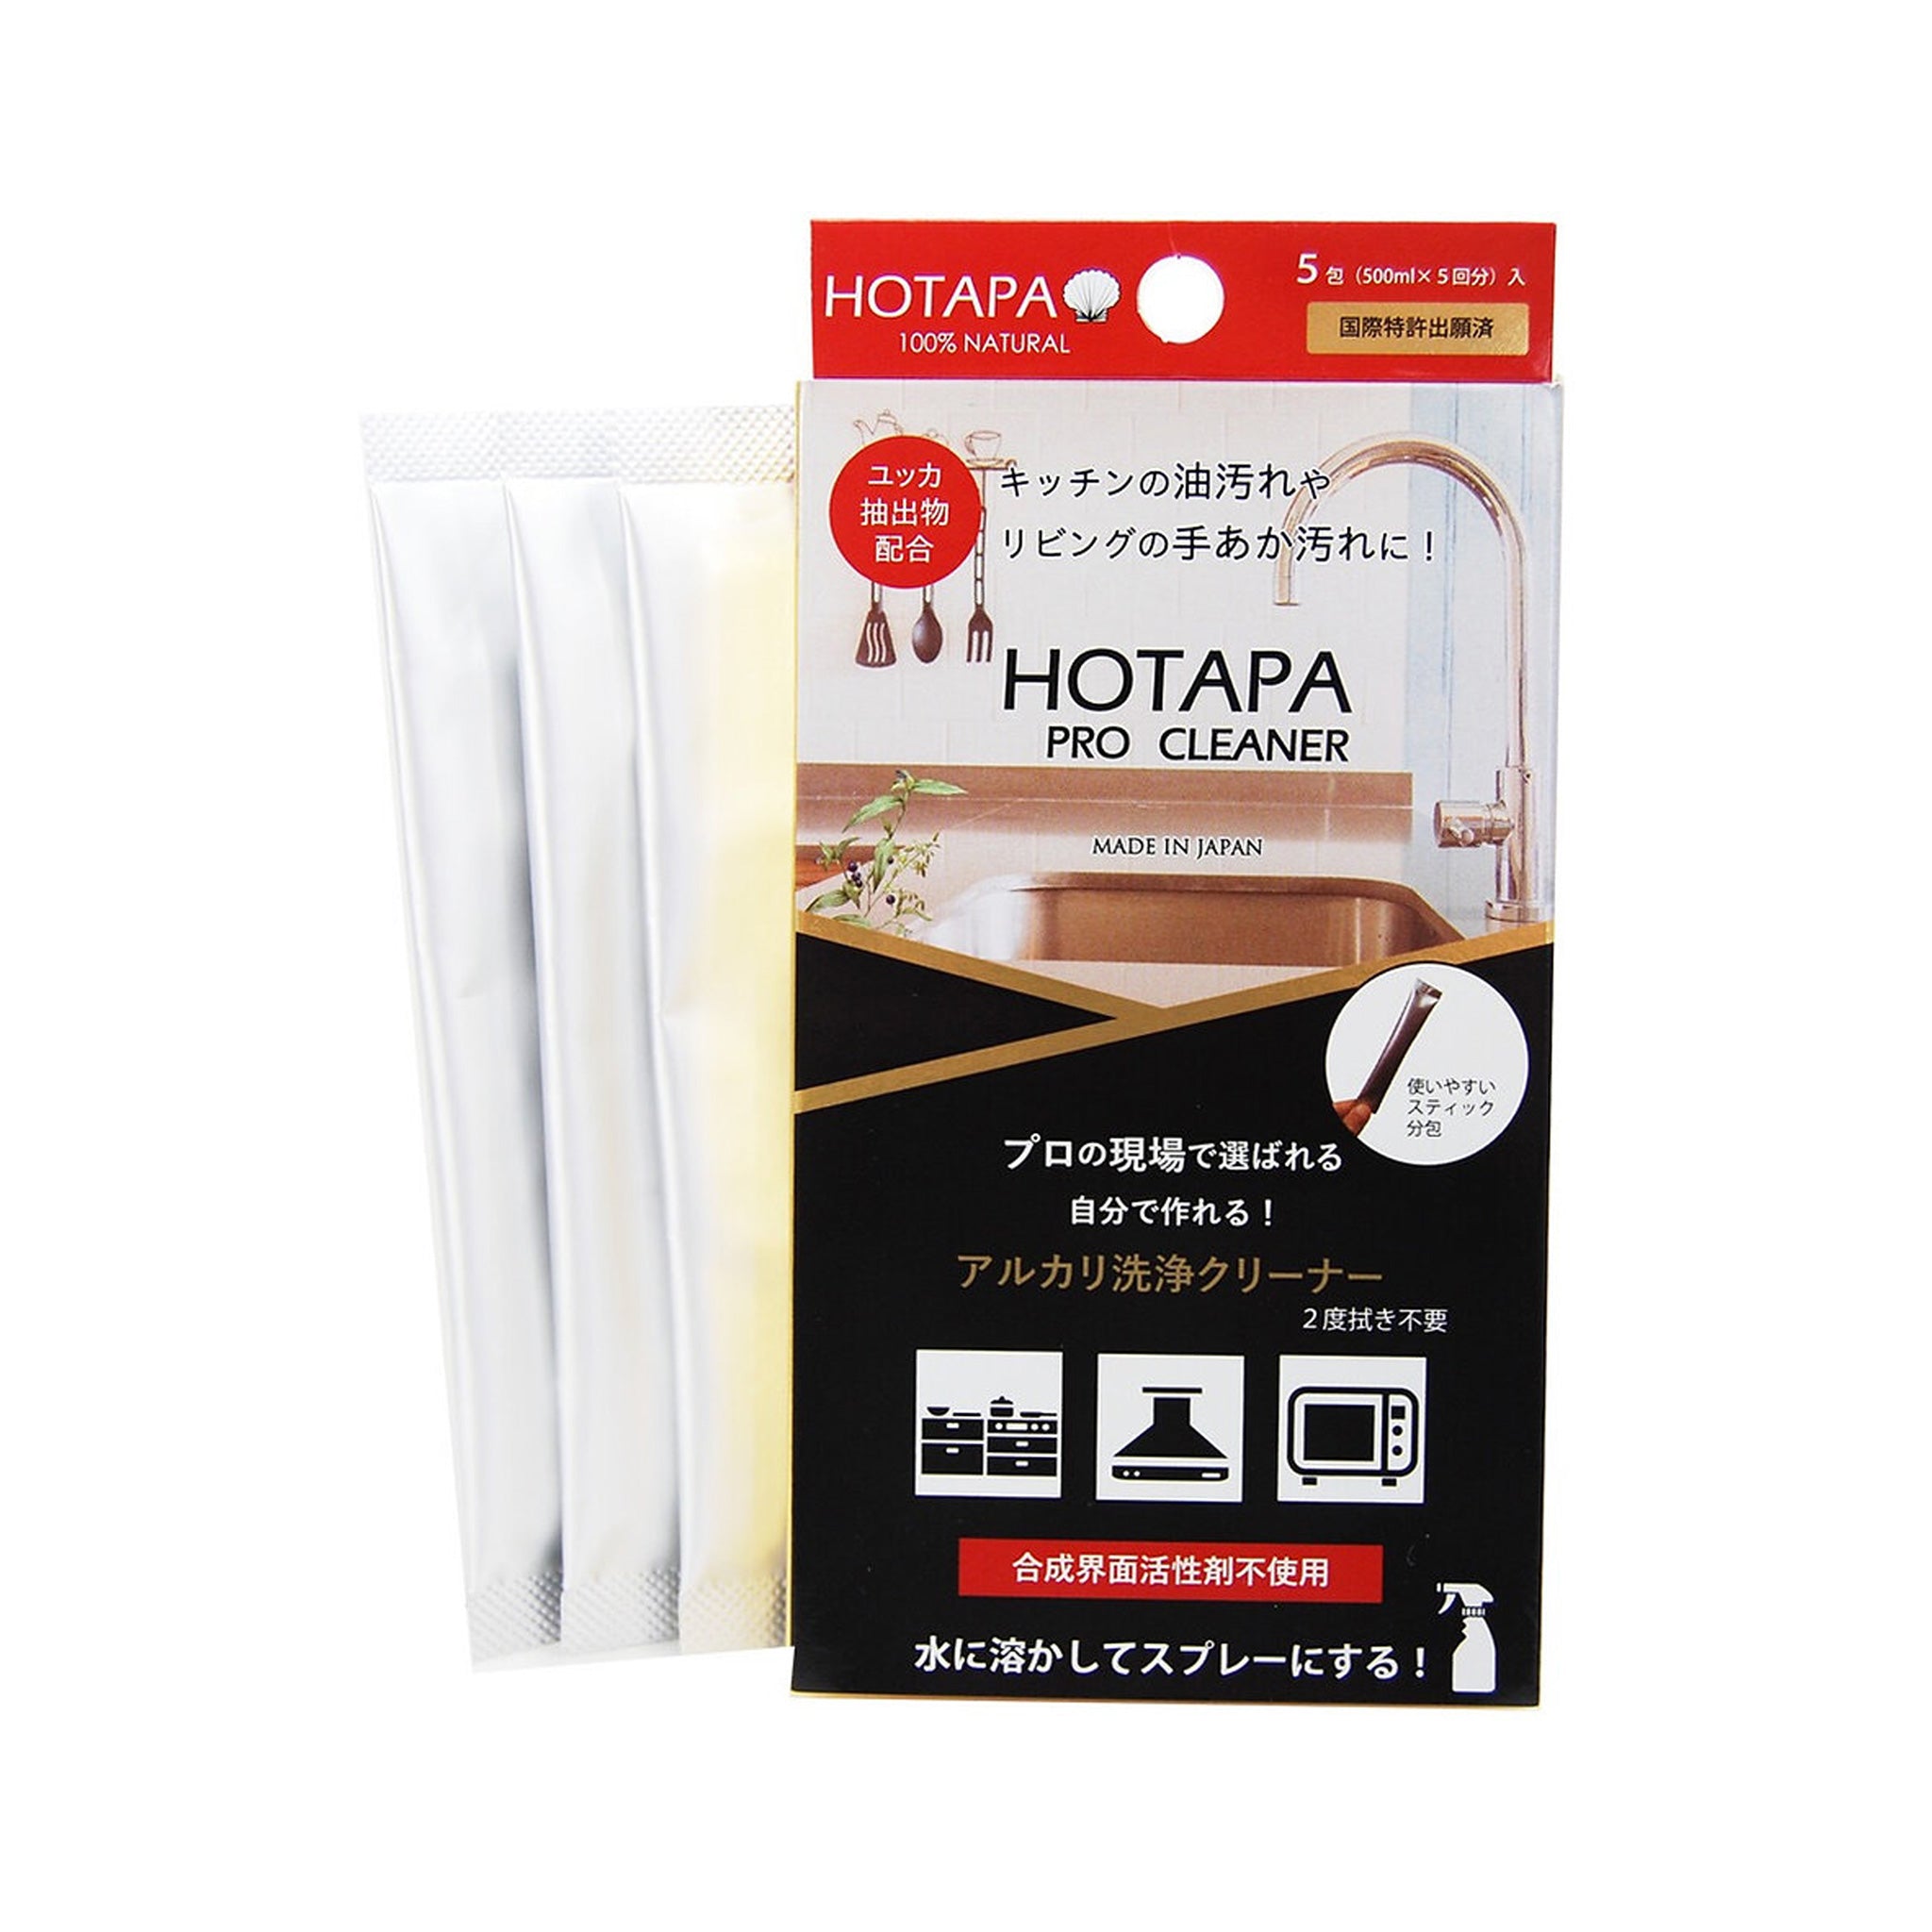 HOTAPA Self-contained Alkaline Cleaning Cleaner 1bag